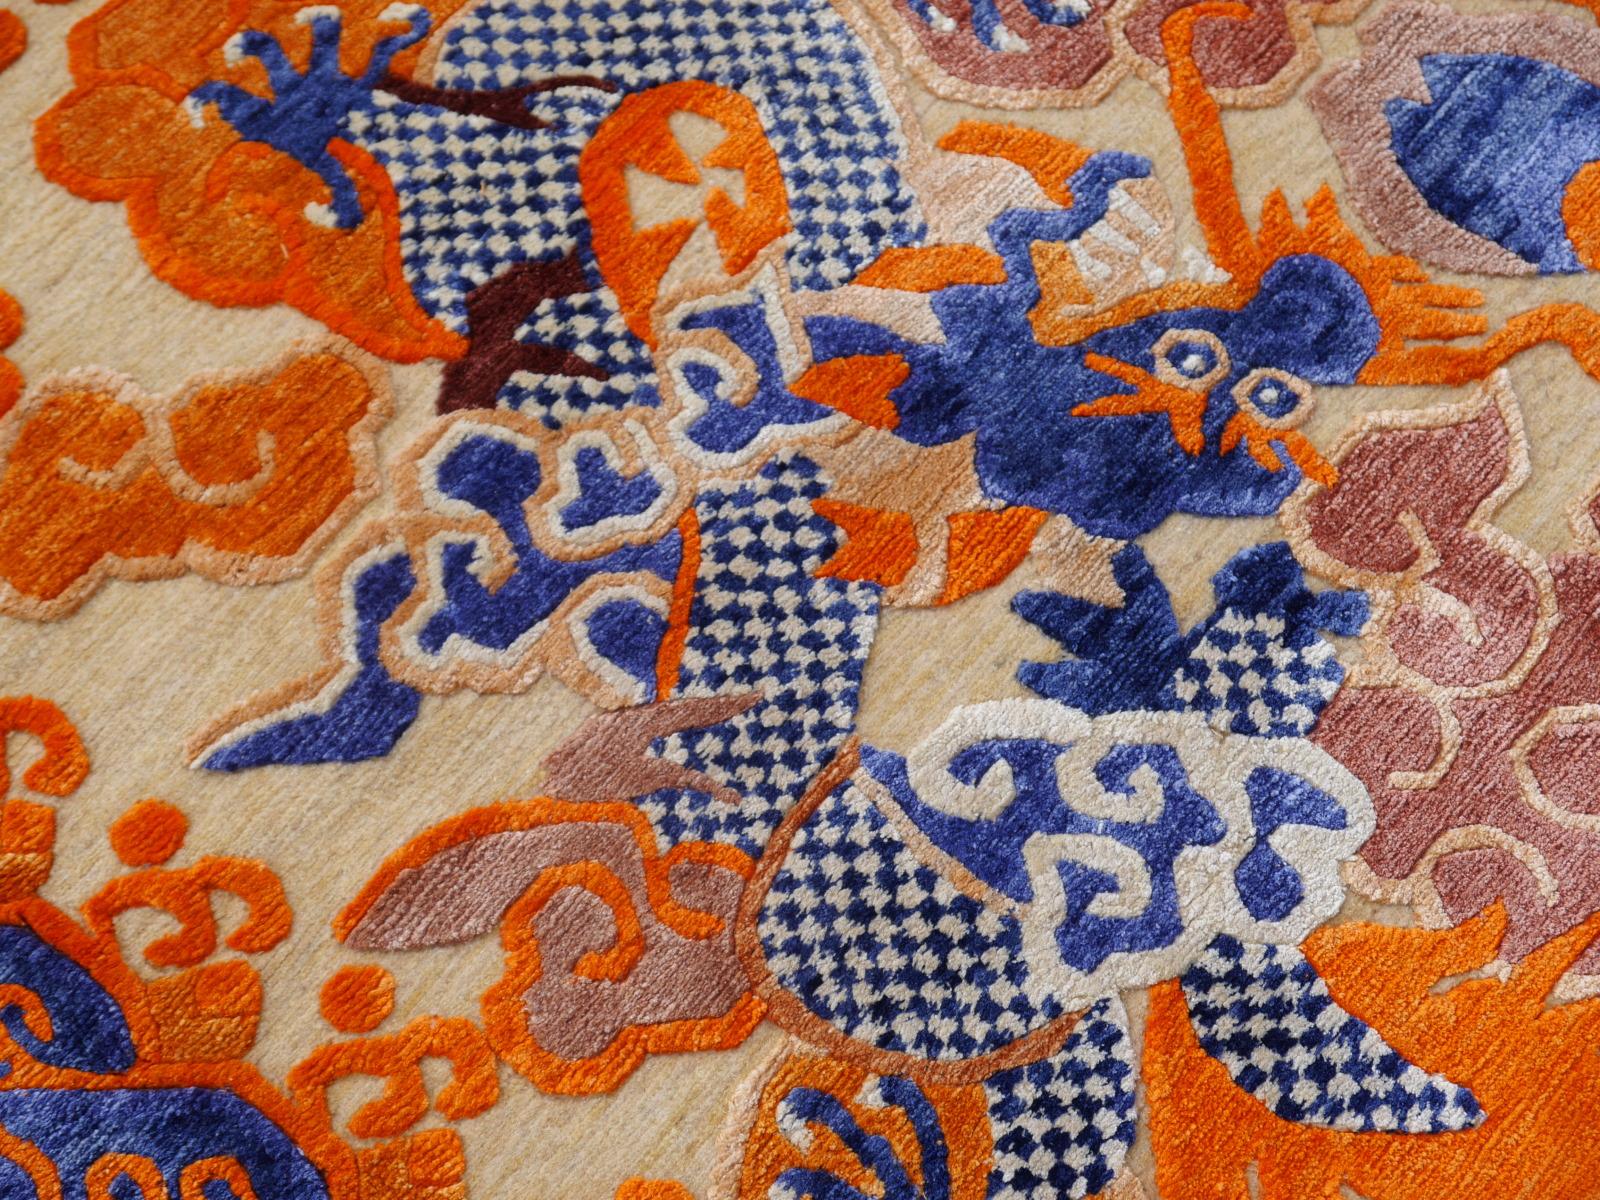 Dragon Design Rug Wool and Silk in Style of Chinese Kansu Carpets In New Condition For Sale In Lohr, Bavaria, DE